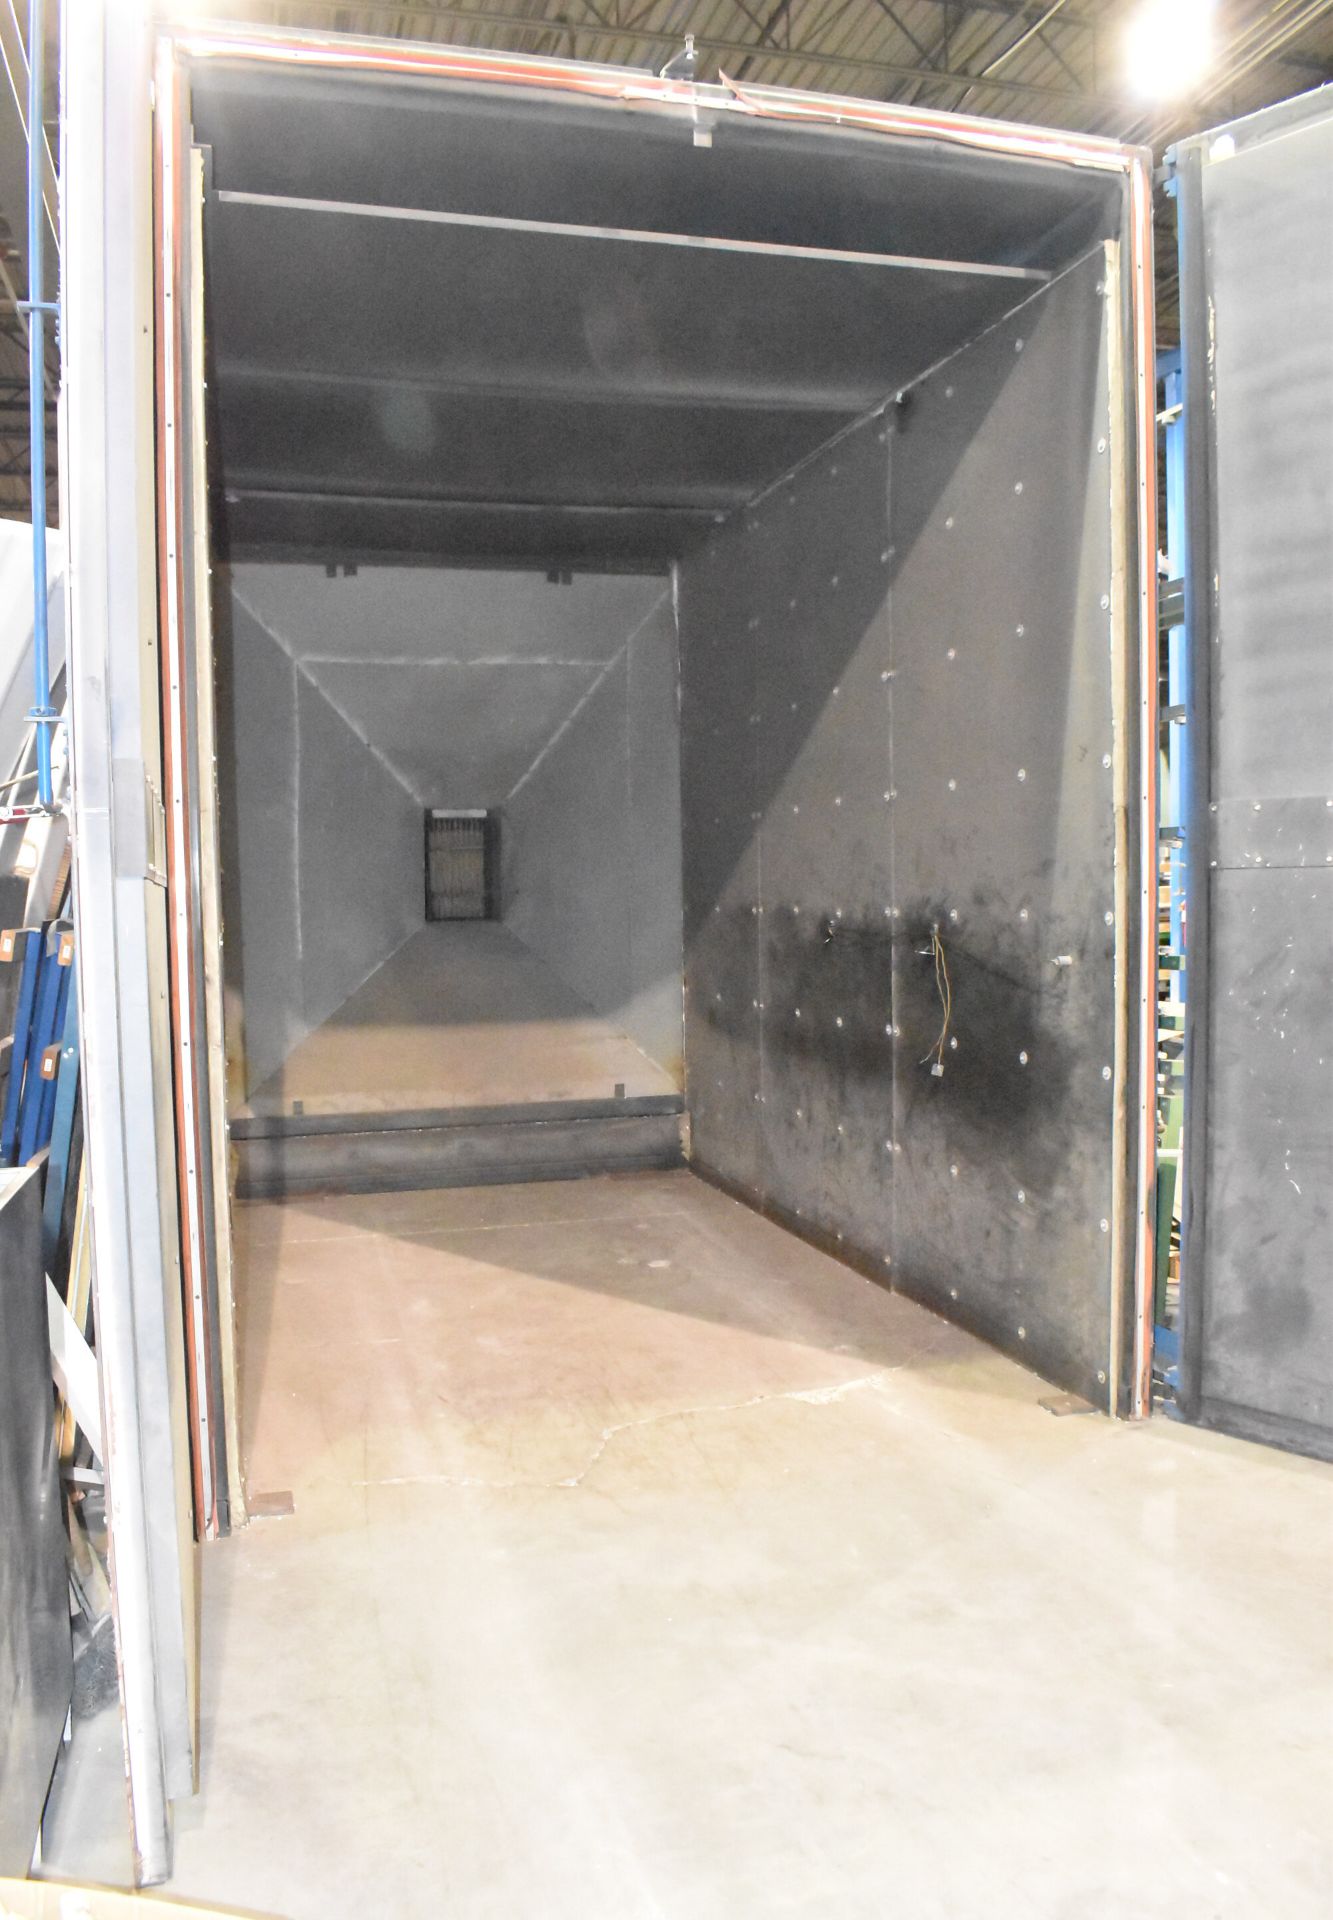 DESIGN AND INTEGRATION 8' X 14' X 12' HEAT SOAK TESTING OVEN WITH TEMPERATURES UP TO 505 DEGREE - Image 4 of 9